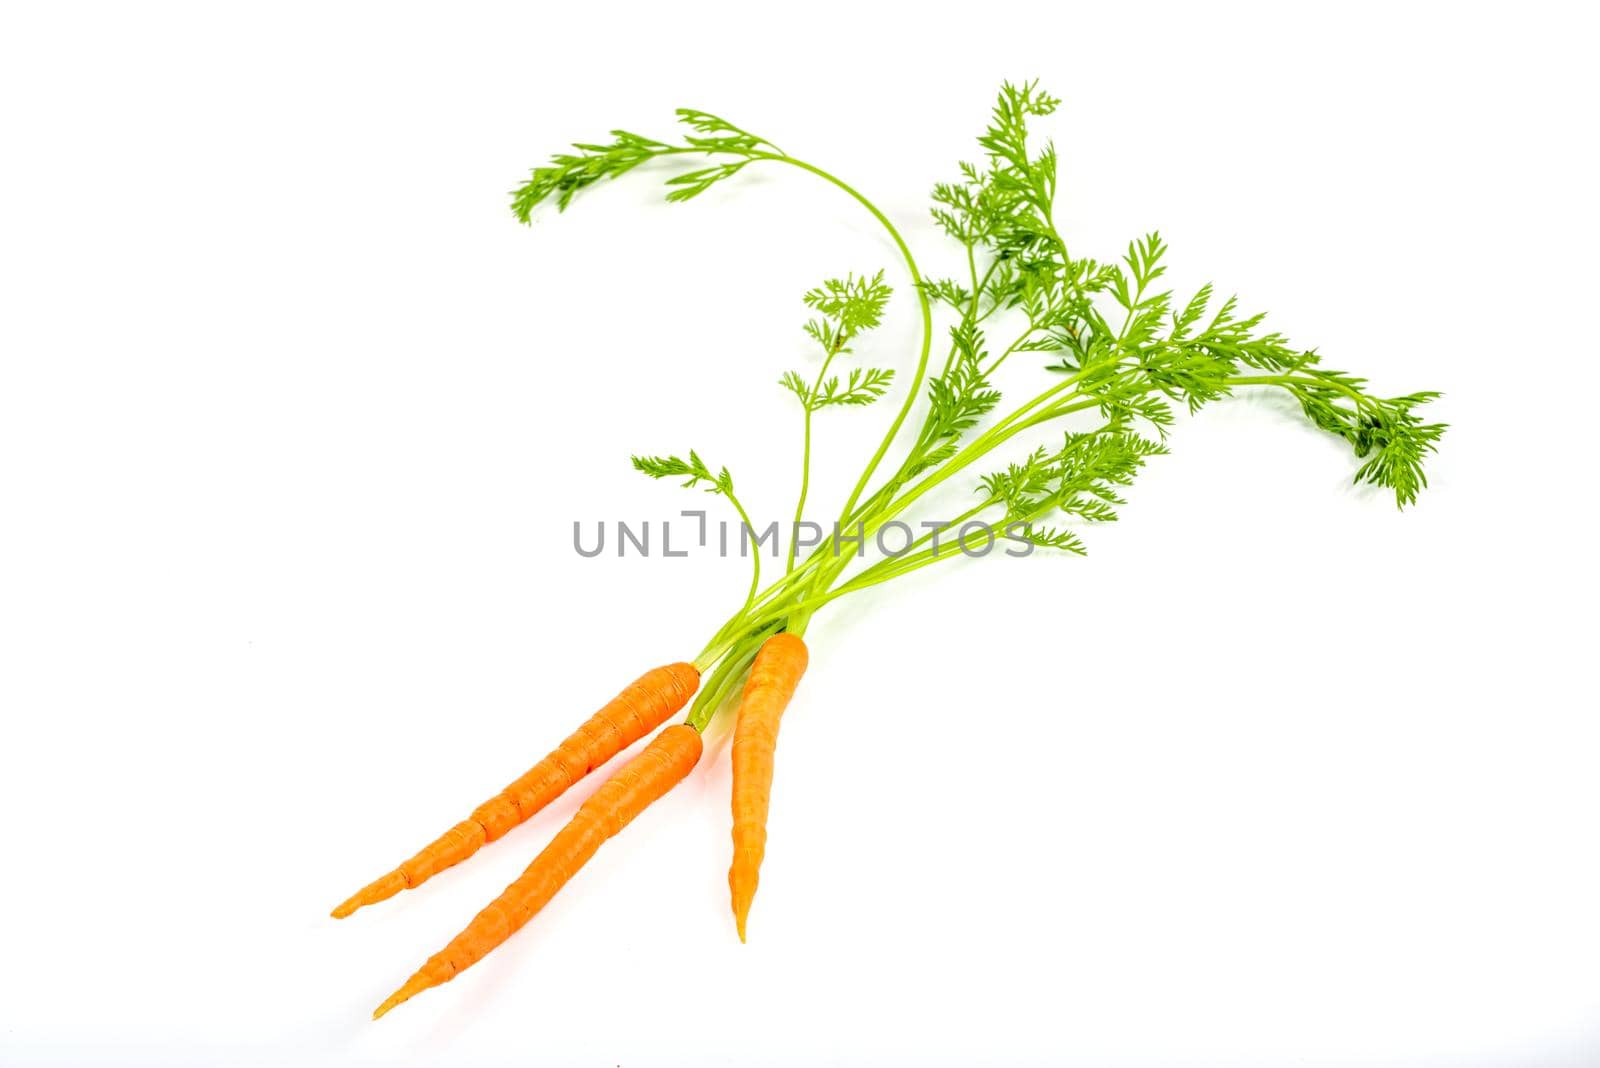 Bunch of fresh baby carrots isolated on white background by Sonat